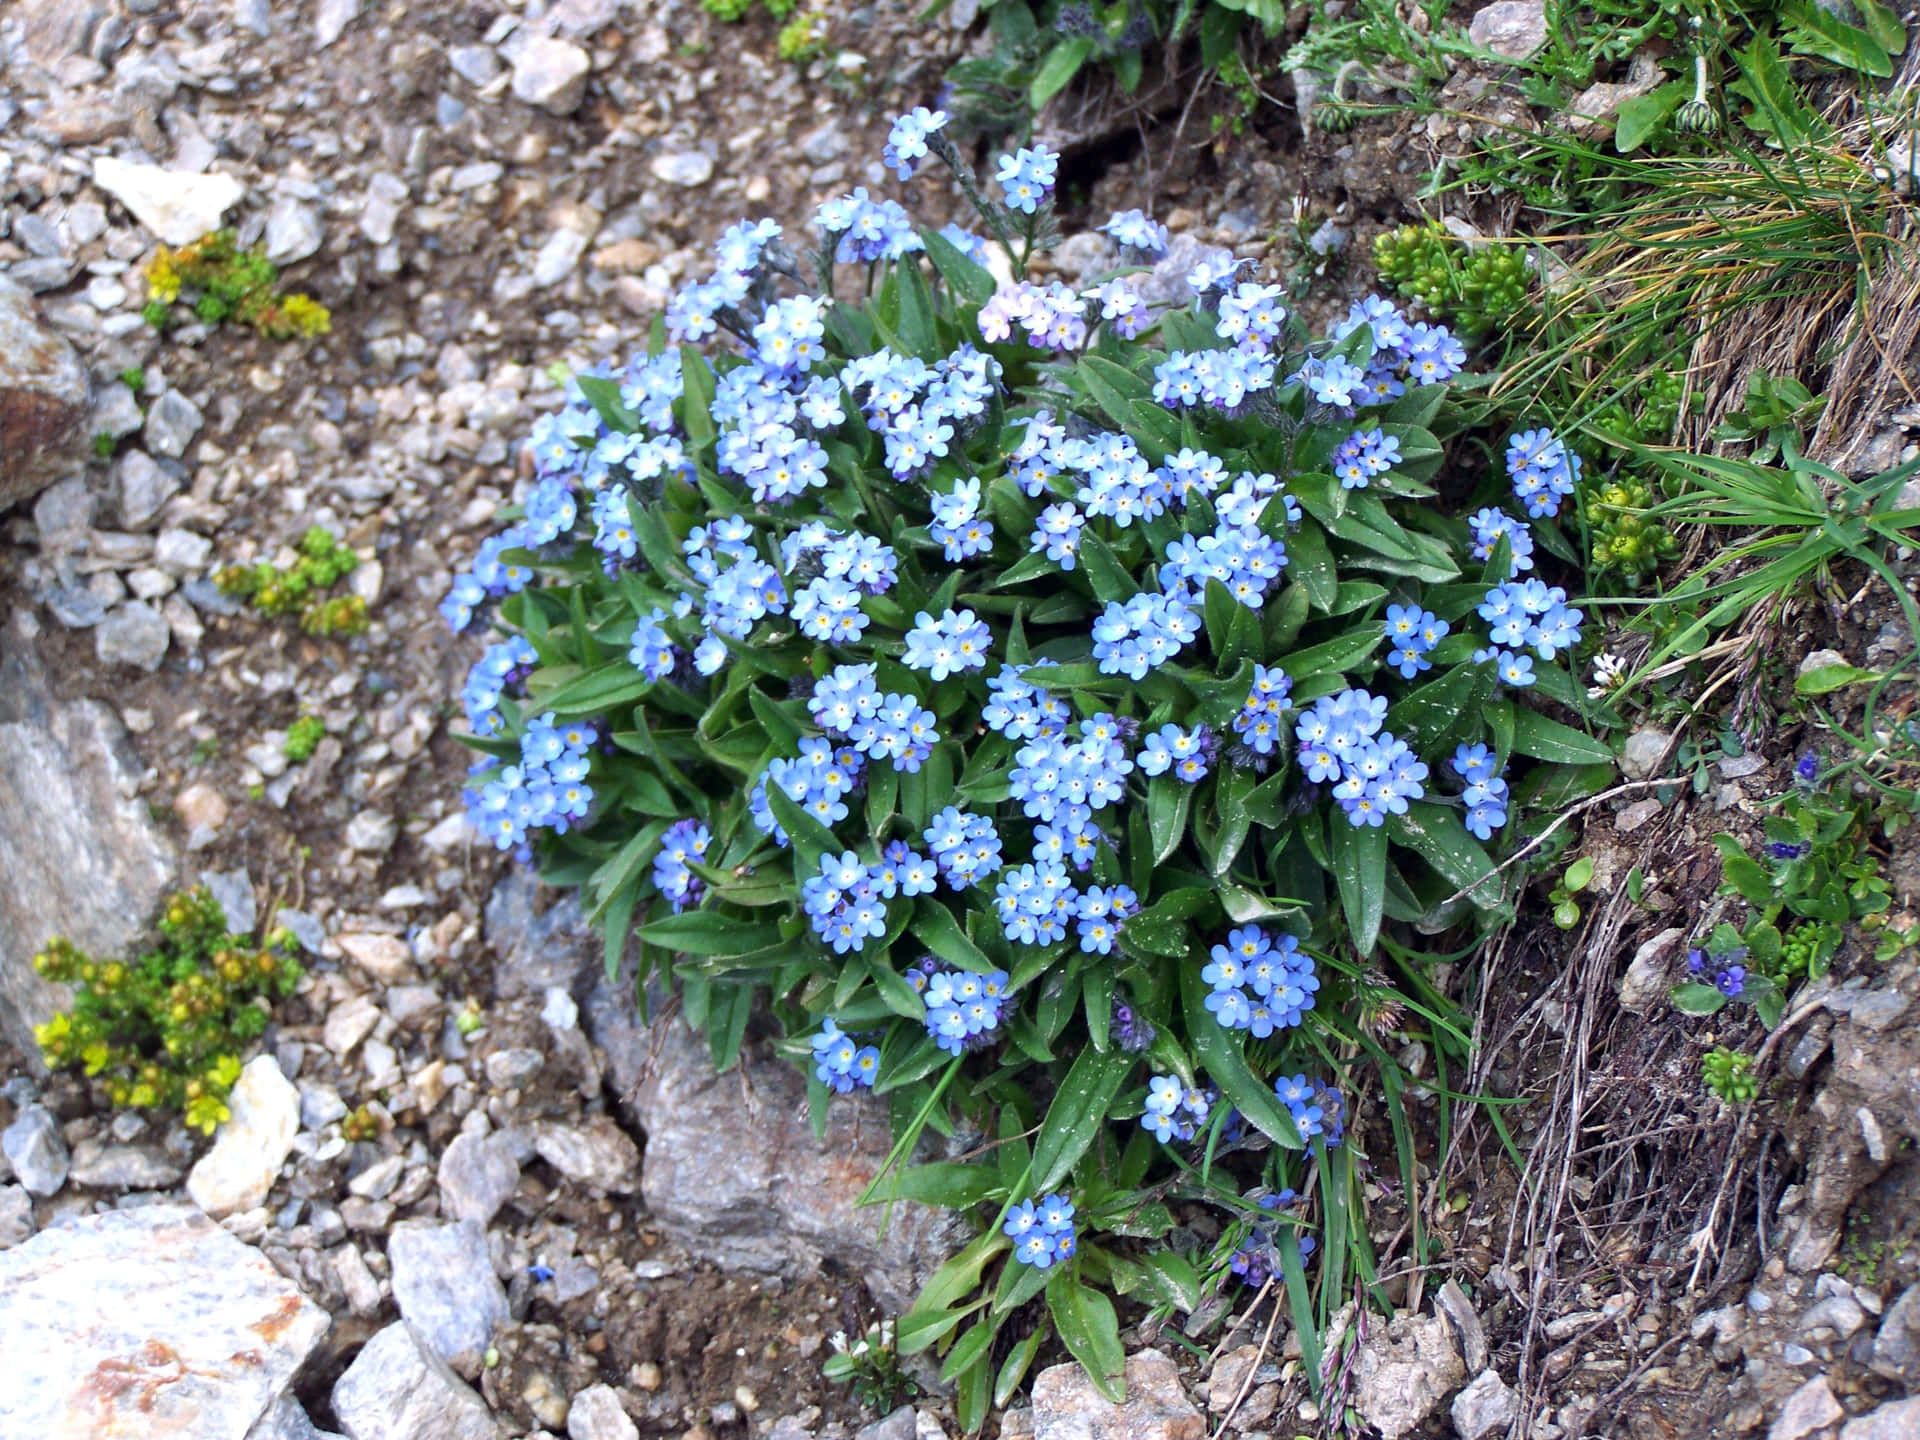 A Small Rock With Flowers